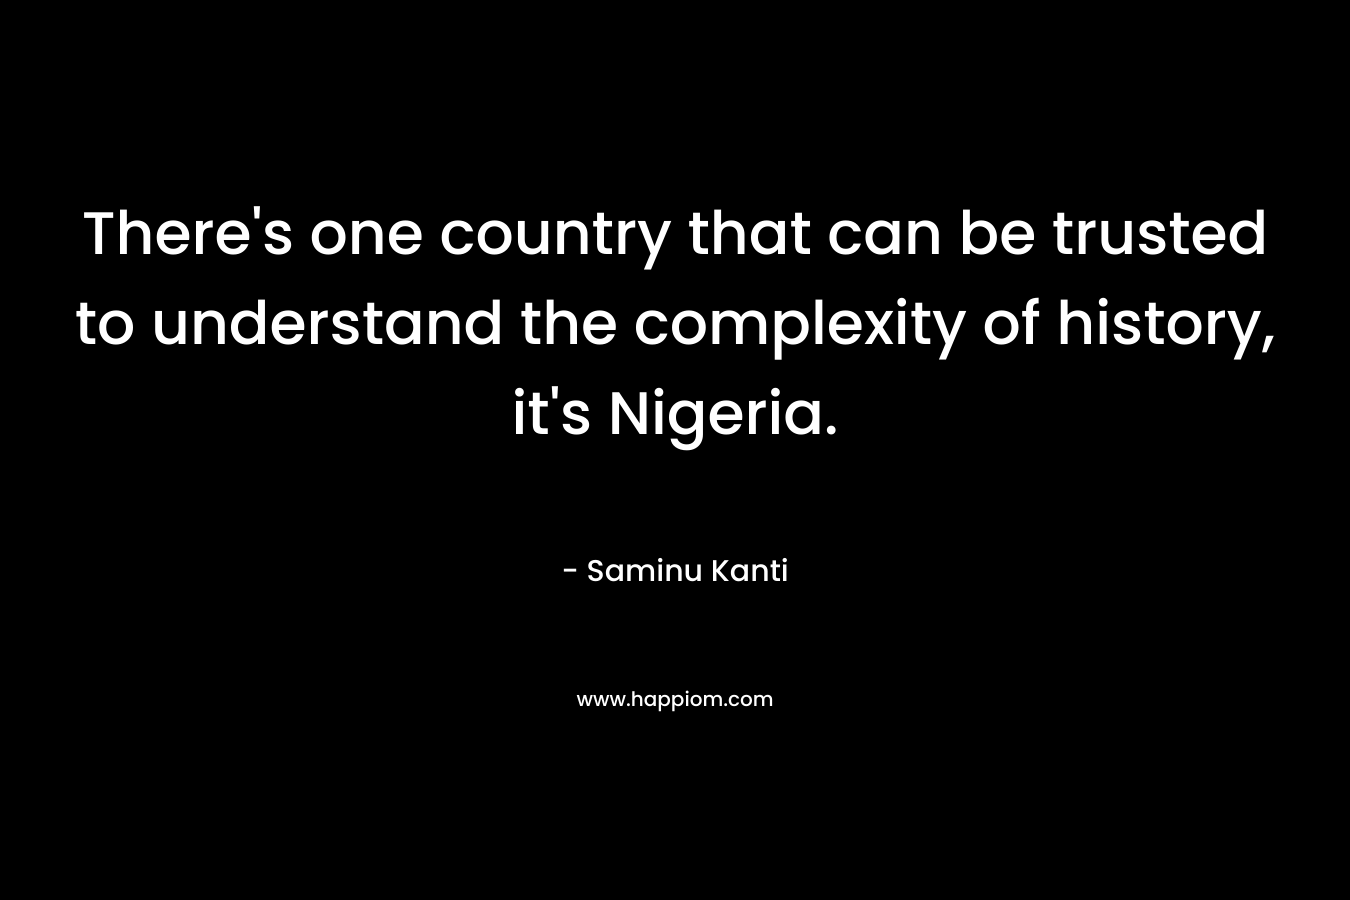 There's one country that can be trusted to understand the complexity of history, it's Nigeria.